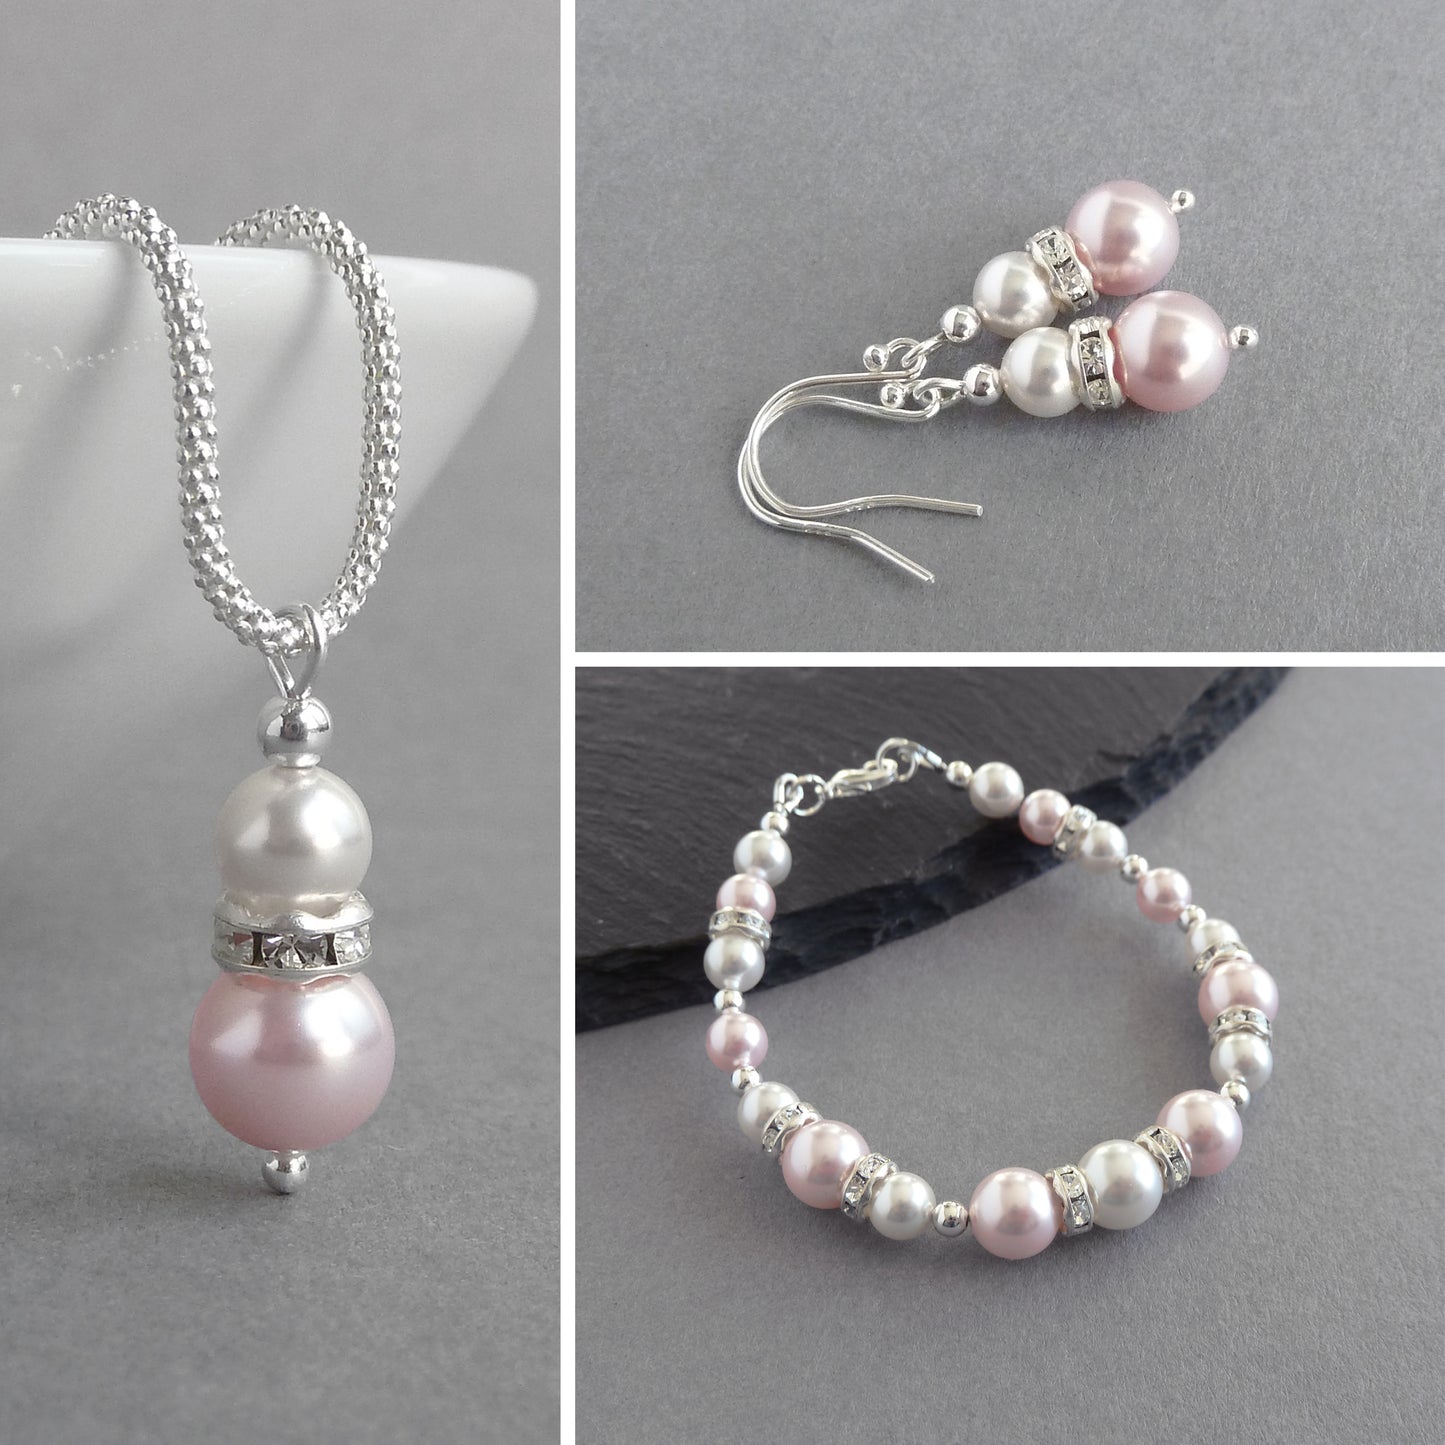 Blush pink pearl and crystal jewellery set by Anna King